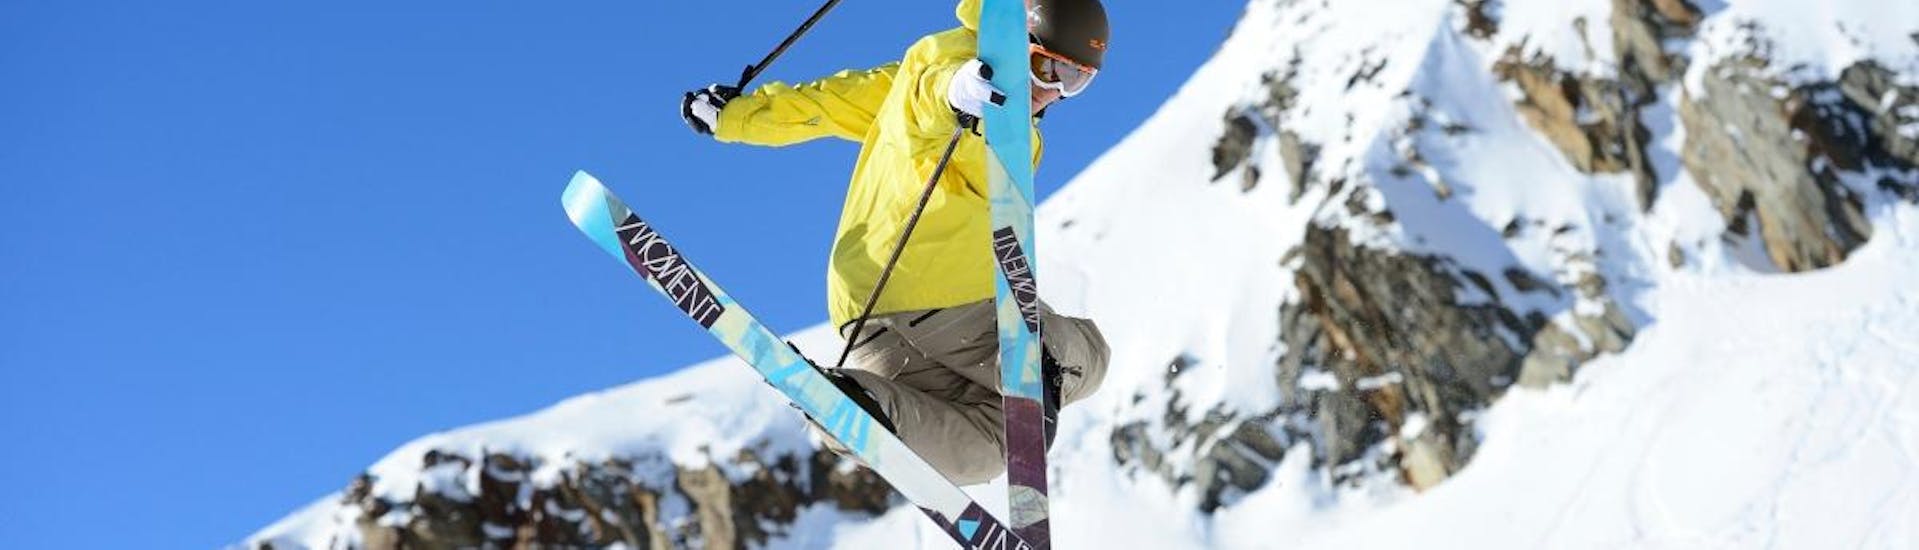 A freestyle skier is doing some tricks in the air as part of his Private Freestyle Snowboarding Lessons for Adults with Stoked Snowsports School Zermatt.